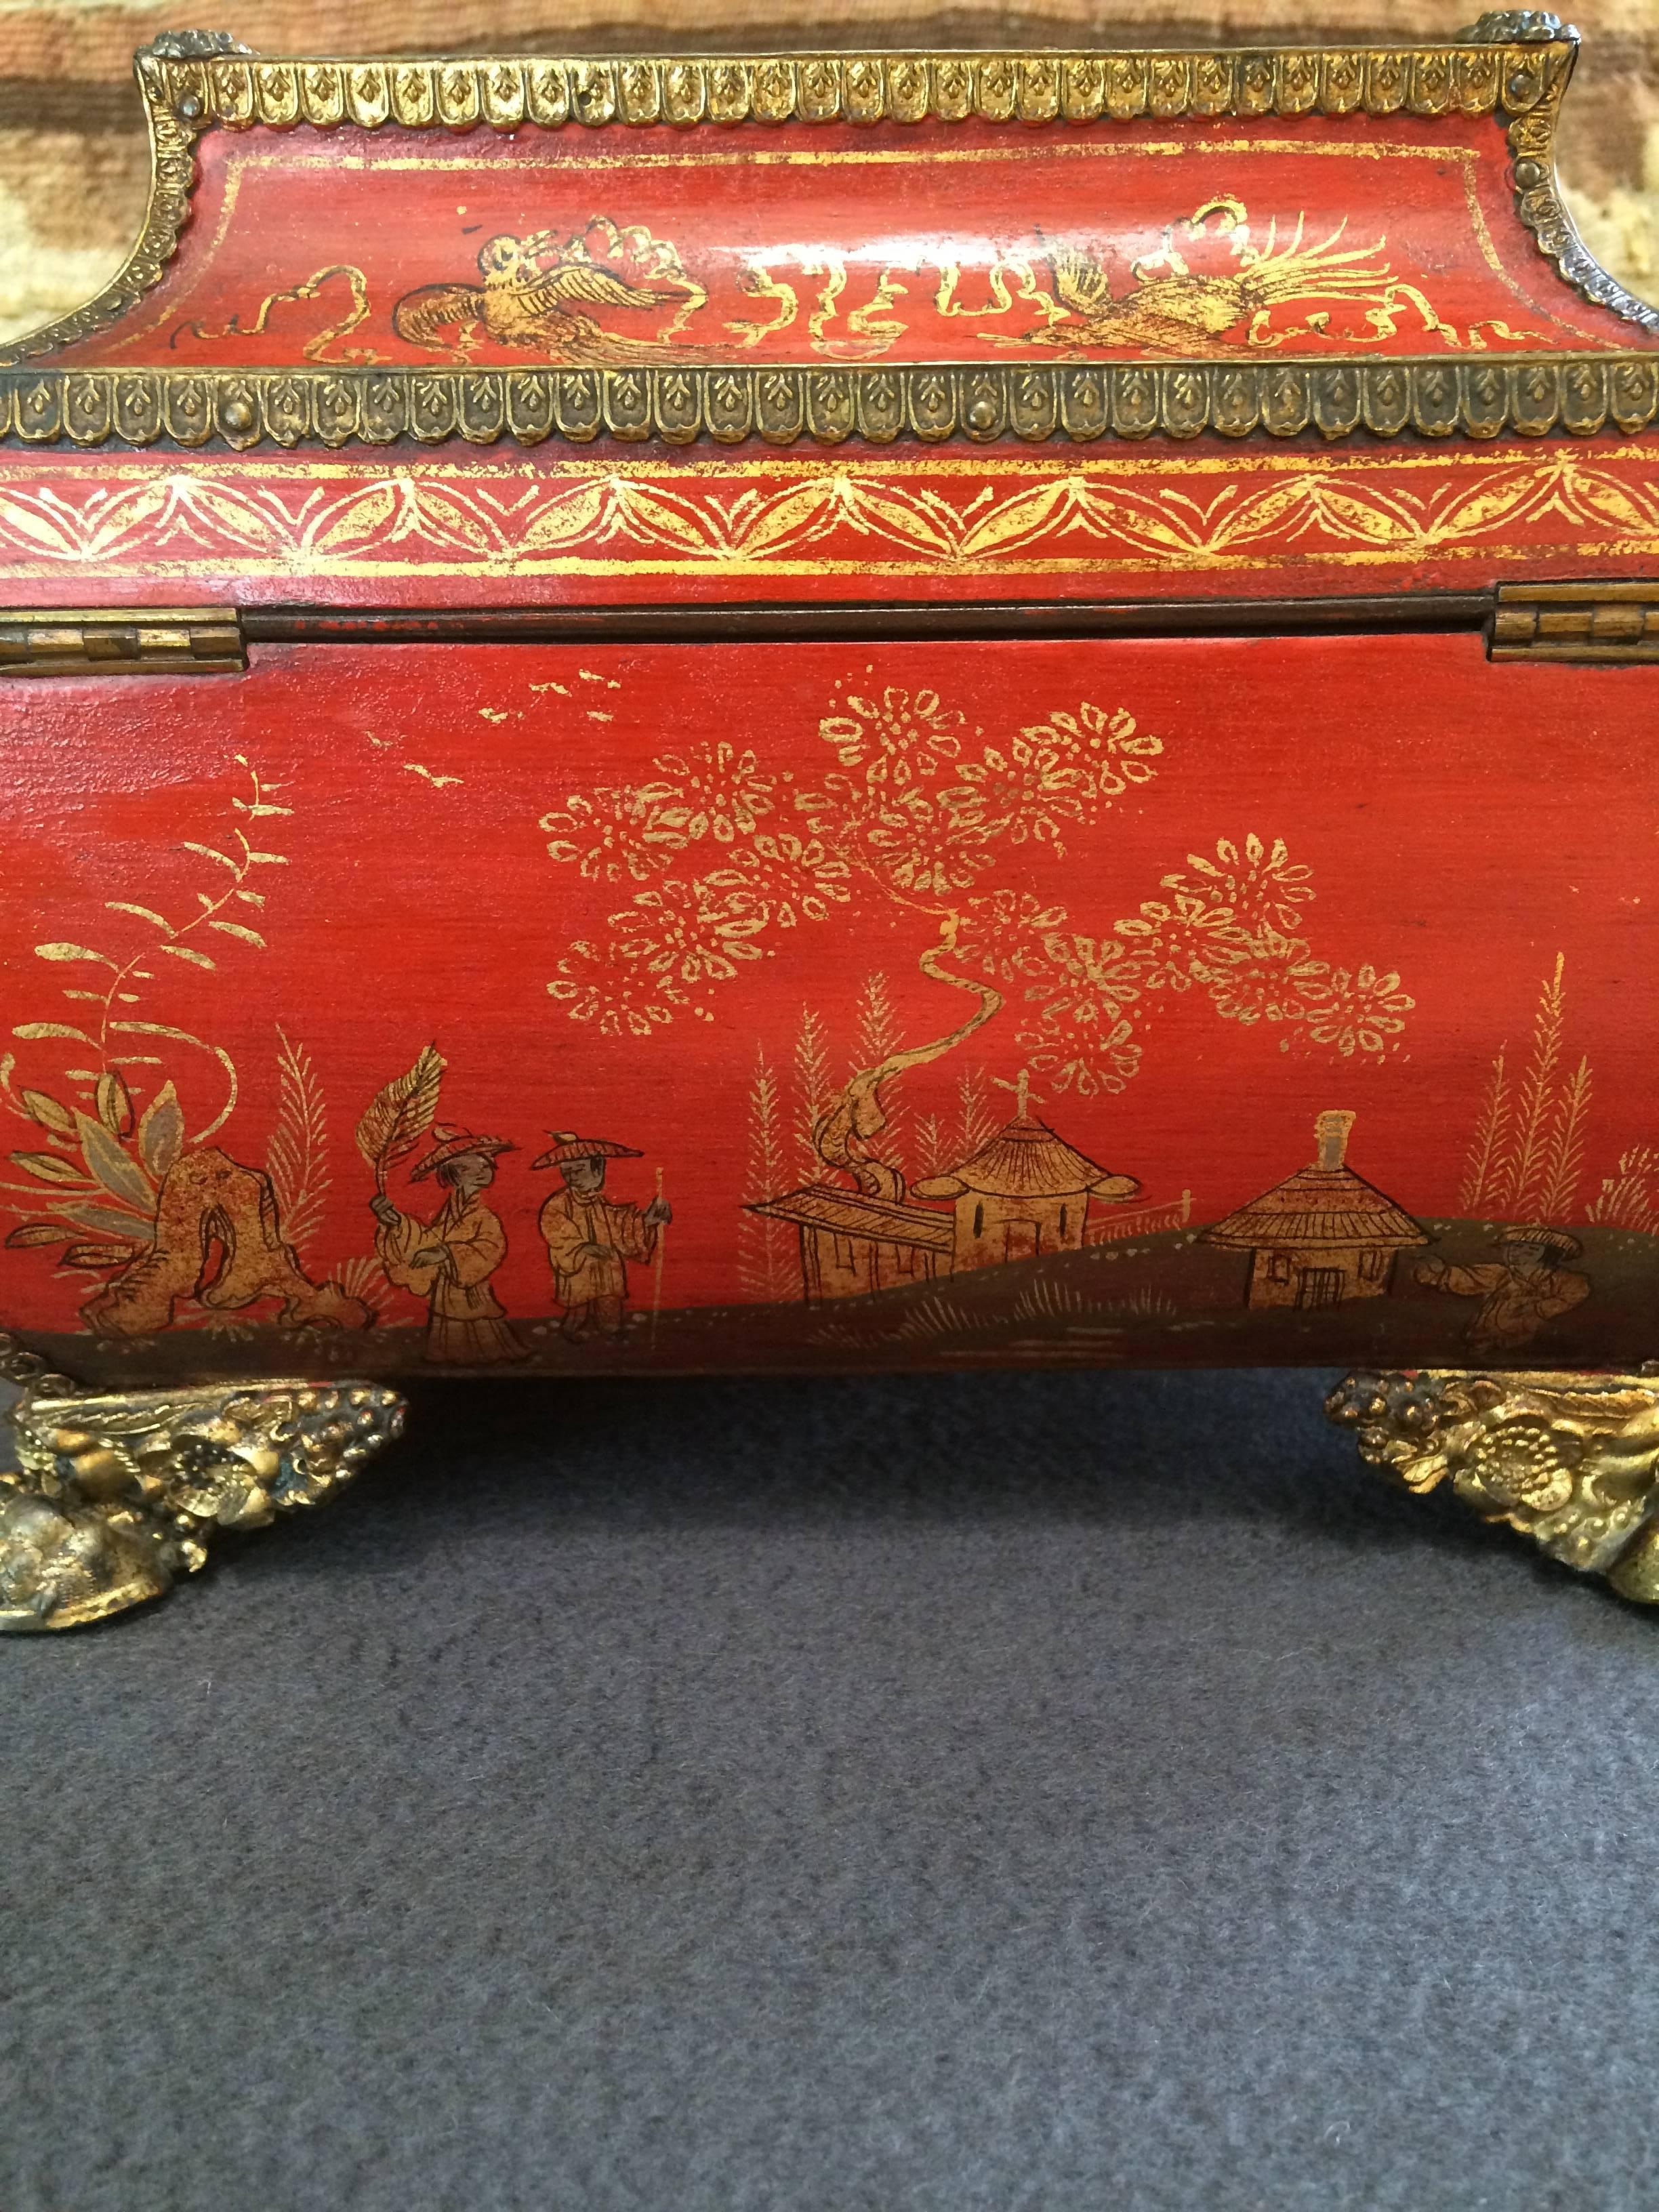 Charming Small Red Lacquered Chinoiserie Sewing Box, 19th Century For Sale 3